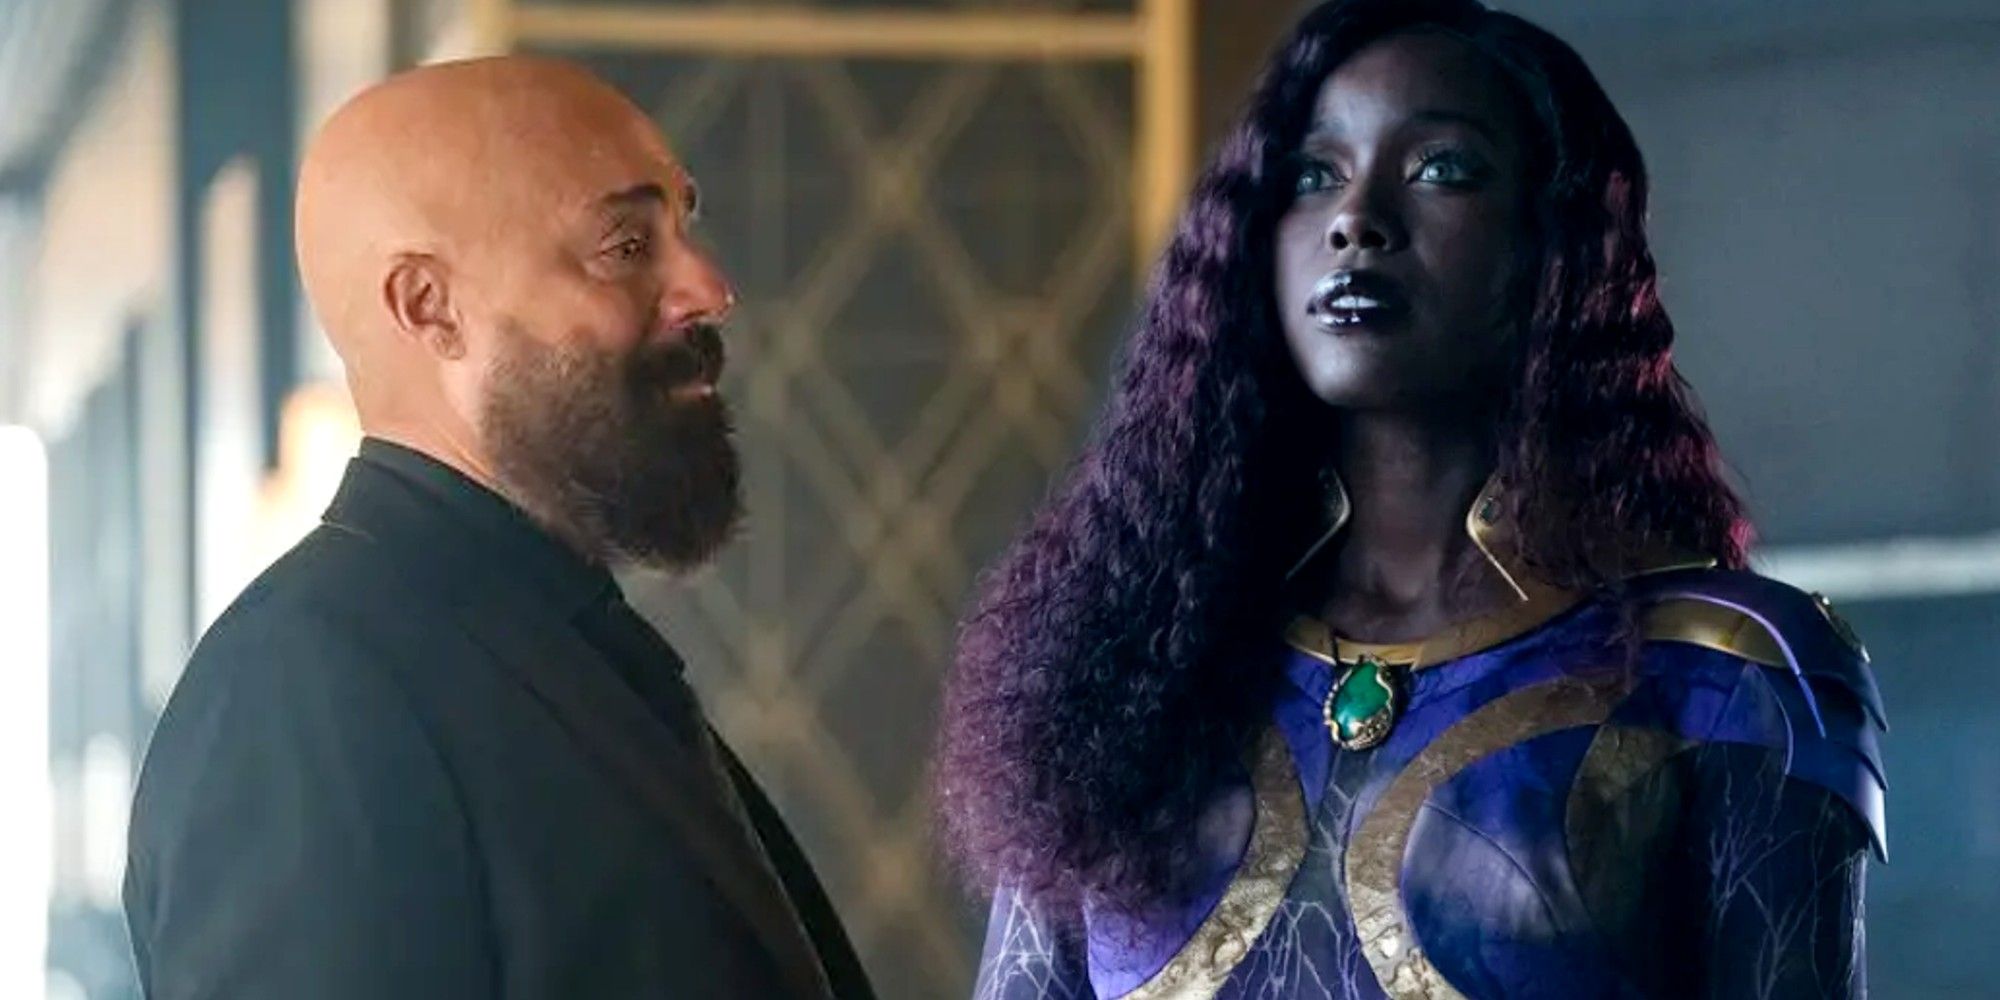 Titans Titus Welliver and Anna Diop as Lex Luthor and Starfire